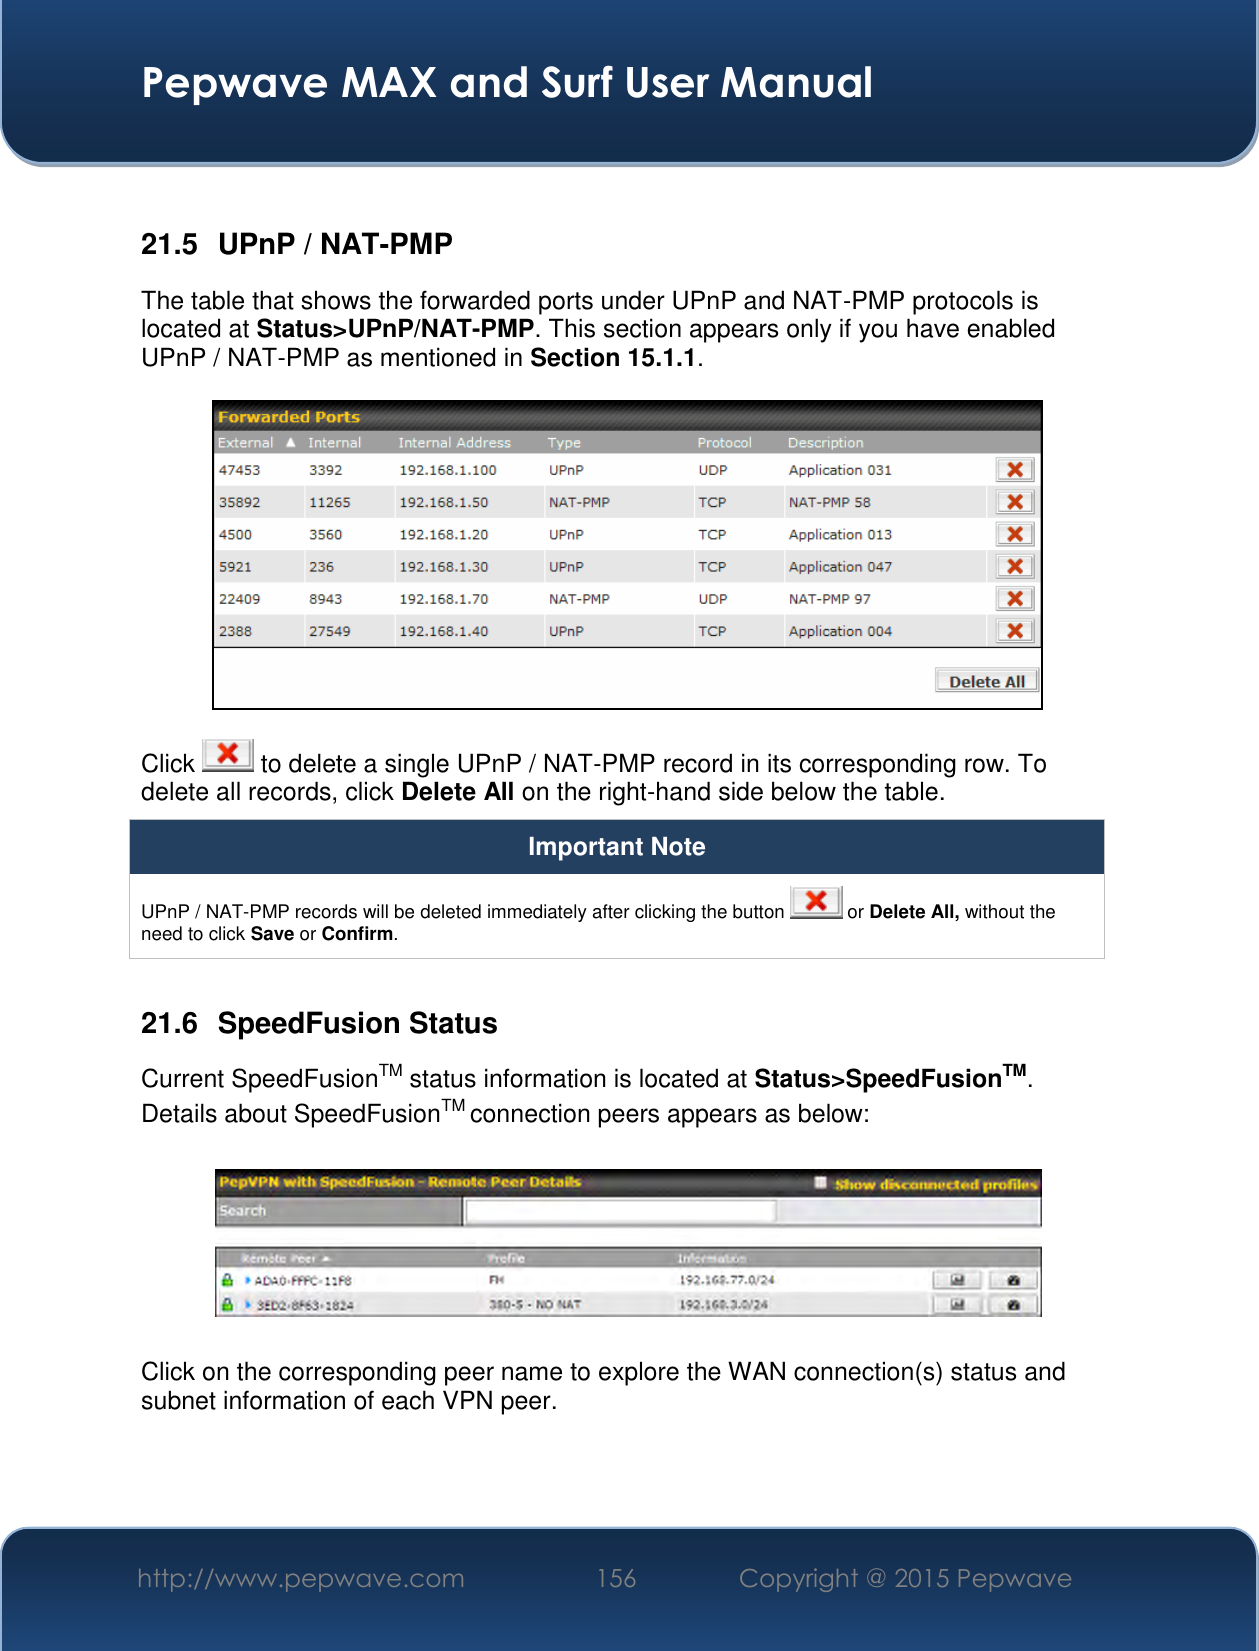  Pepwave MAX and Surf User Manual http://www.pepwave.com 156   Copyright @ 2015 Pepwave    21.5  UPnP / NAT-PMP The table that shows the forwarded ports under UPnP and NAT-PMP protocols is located at Status&gt;UPnP/NAT-PMP. This section appears only if you have enabled UPnP / NAT-PMP as mentioned in Section 15.1.1.  Click   to delete a single UPnP / NAT-PMP record in its corresponding row. To delete all records, click Delete All on the right-hand side below the table. Important Note UPnP / NAT-PMP records will be deleted immediately after clicking the button   or Delete All, without the need to click Save or Confirm.  21.6  SpeedFusion Status Current SpeedFusionTM status information is located at Status&gt;SpeedFusionTM. Details about SpeedFusionTM connection peers appears as below:    Click on the corresponding peer name to explore the WAN connection(s) status and subnet information of each VPN peer. 